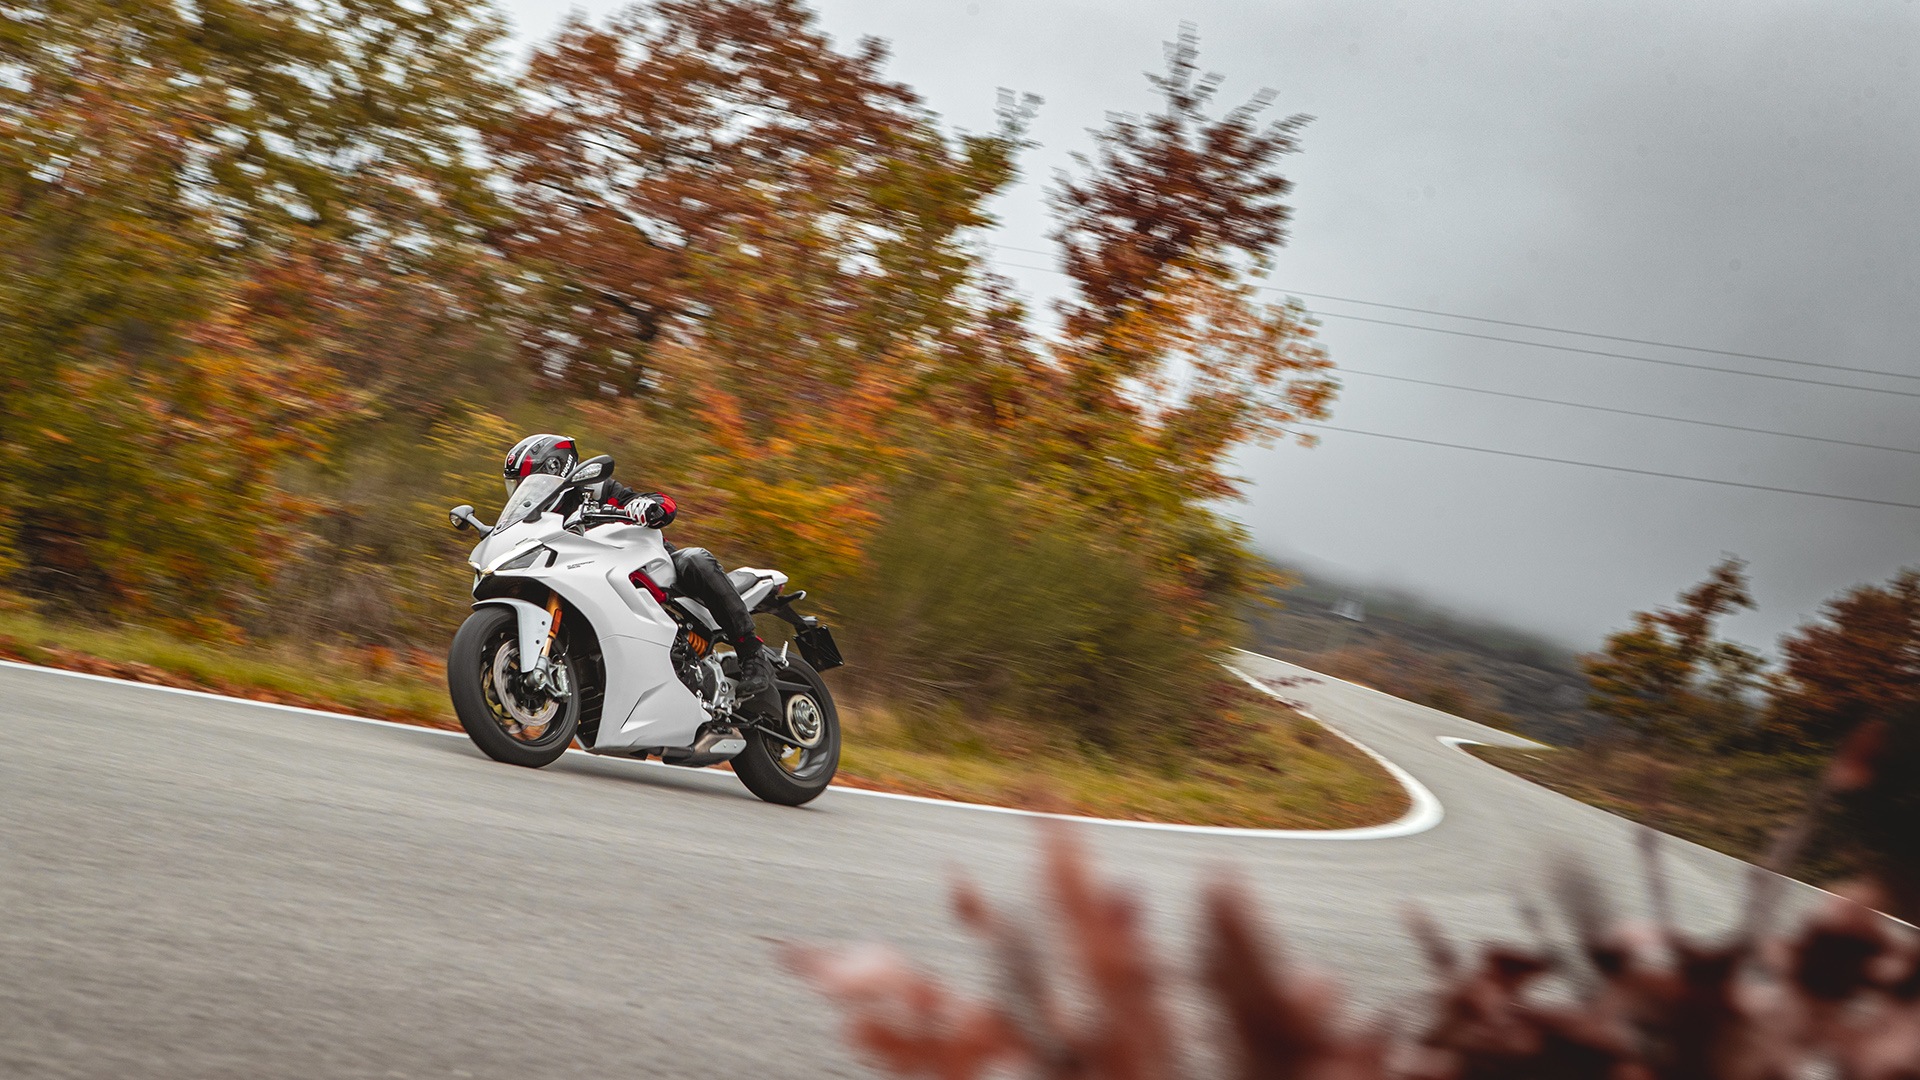 2023 Ducati SuperSport 950 S in Albany, New York - Photo 18